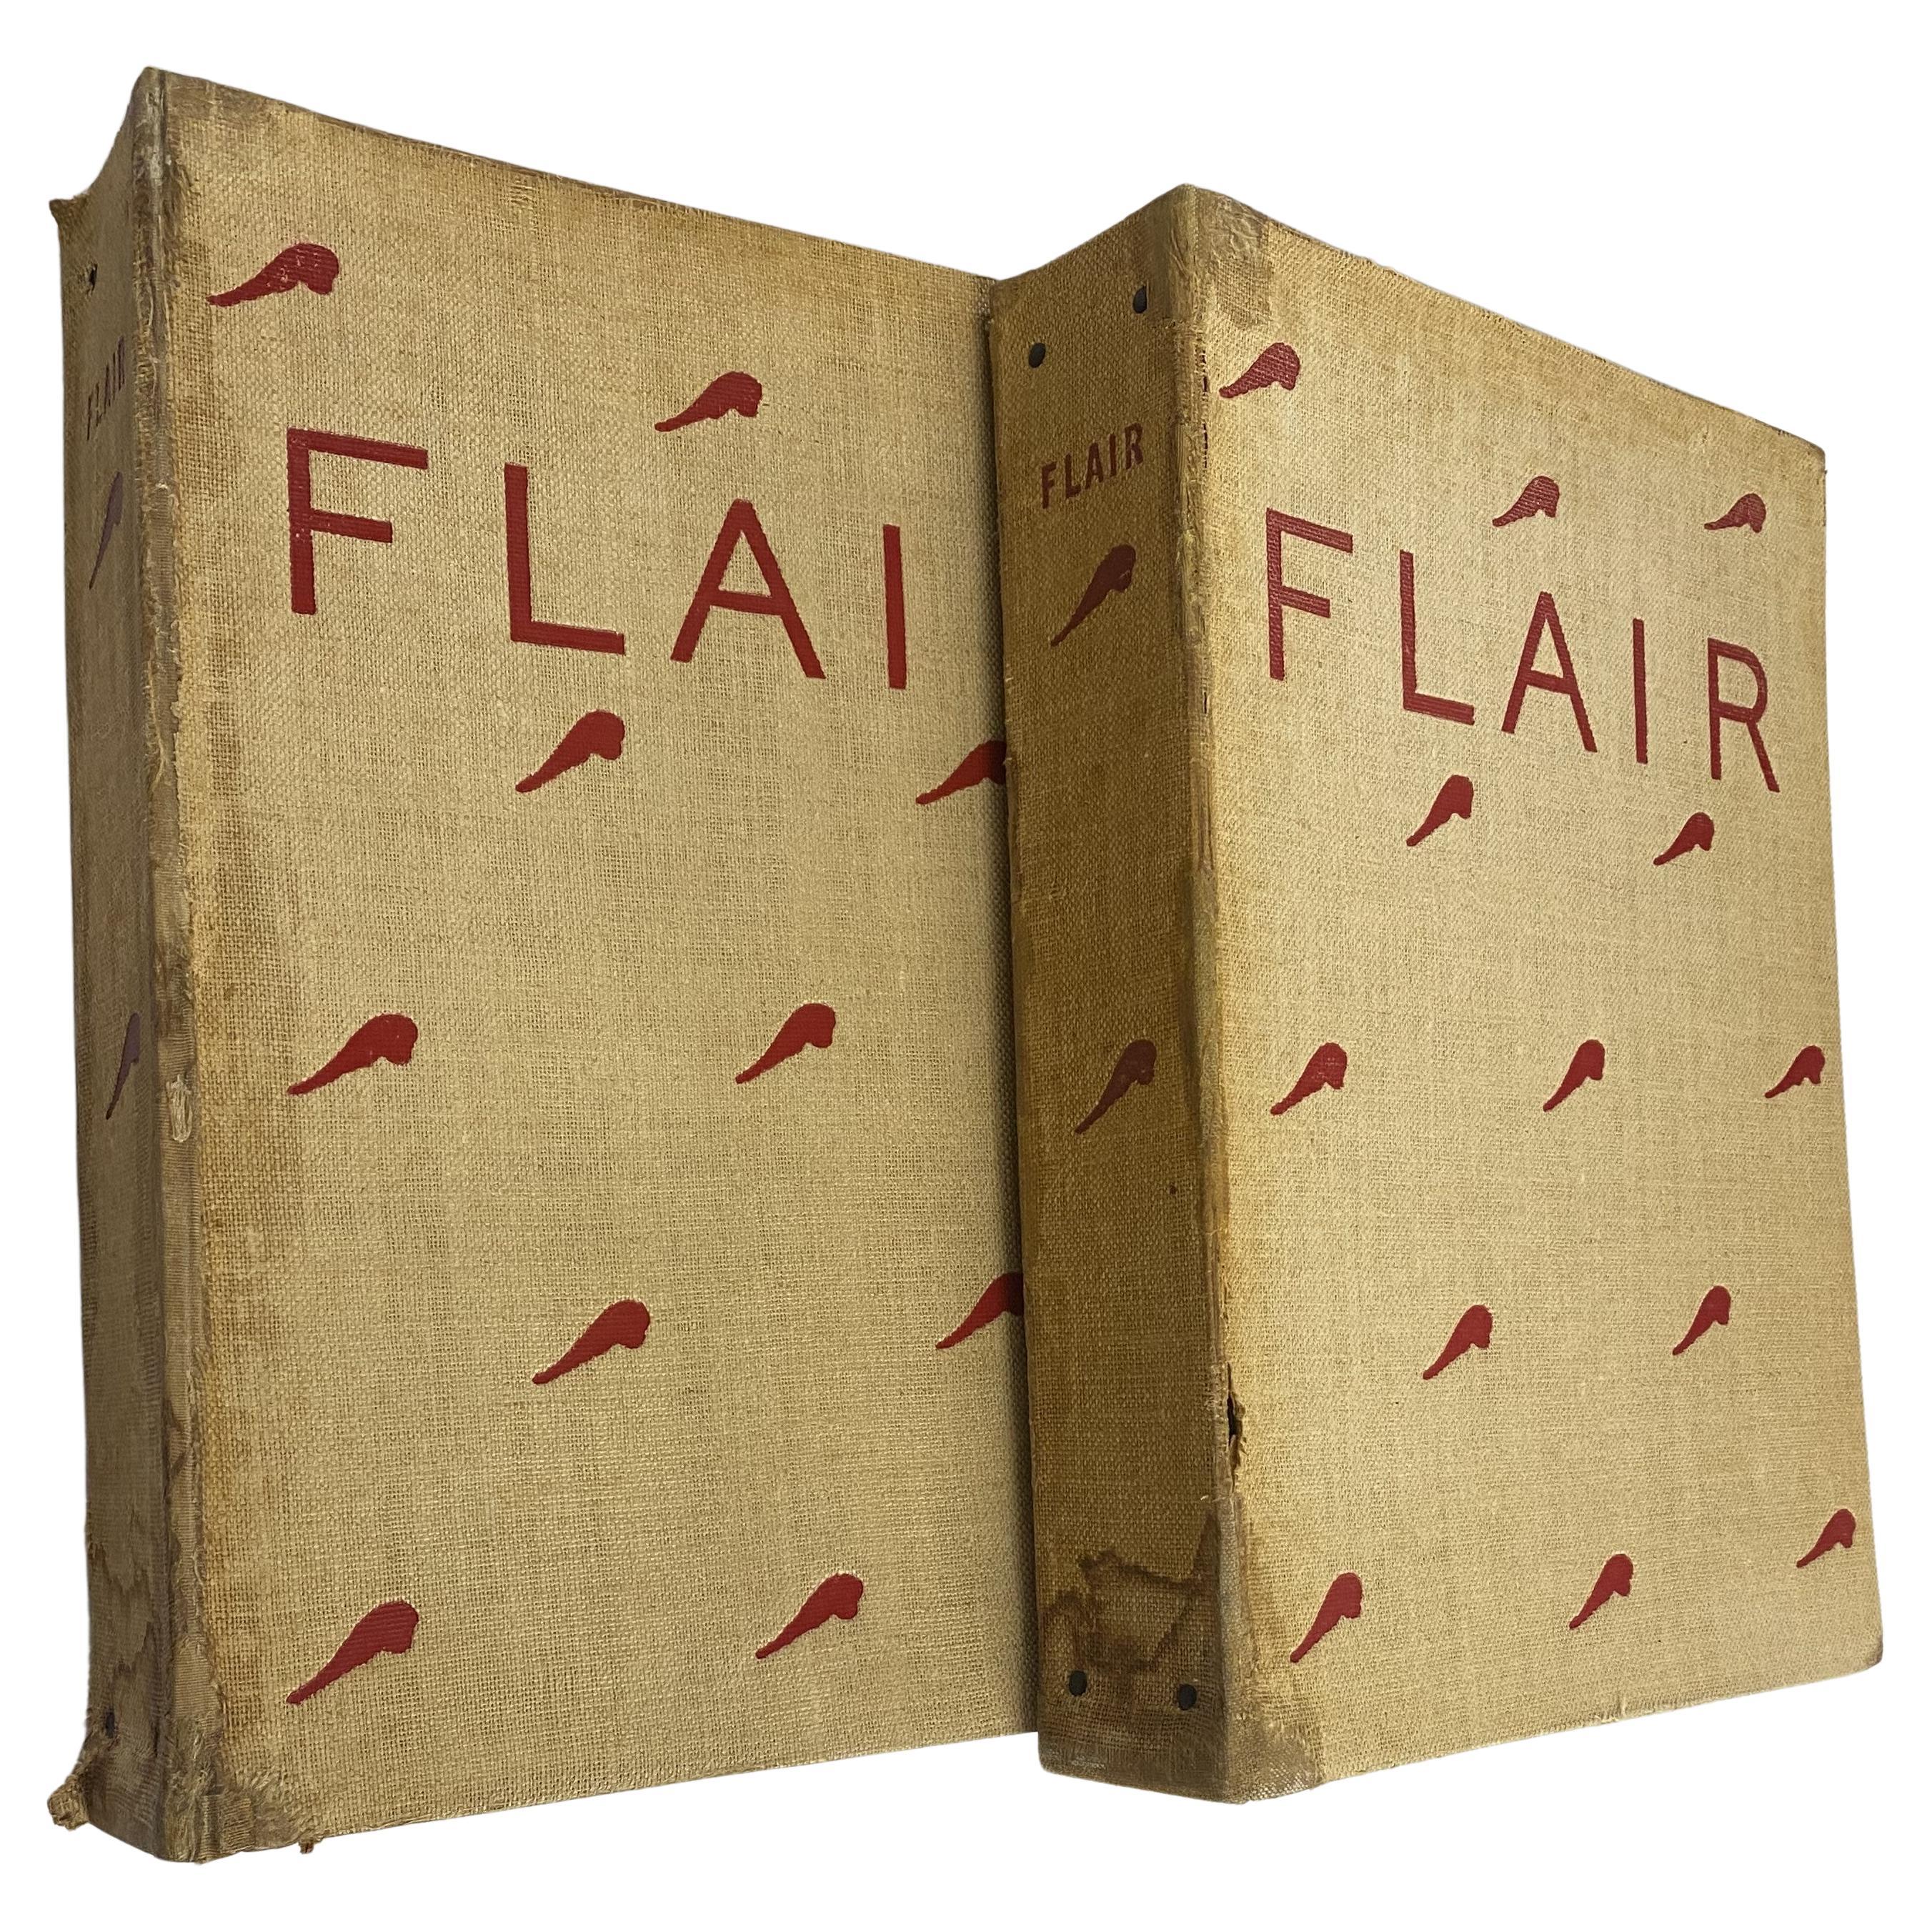 Flair Magazine, Complete Set, February 1950 to January 1951 (Book) For Sale